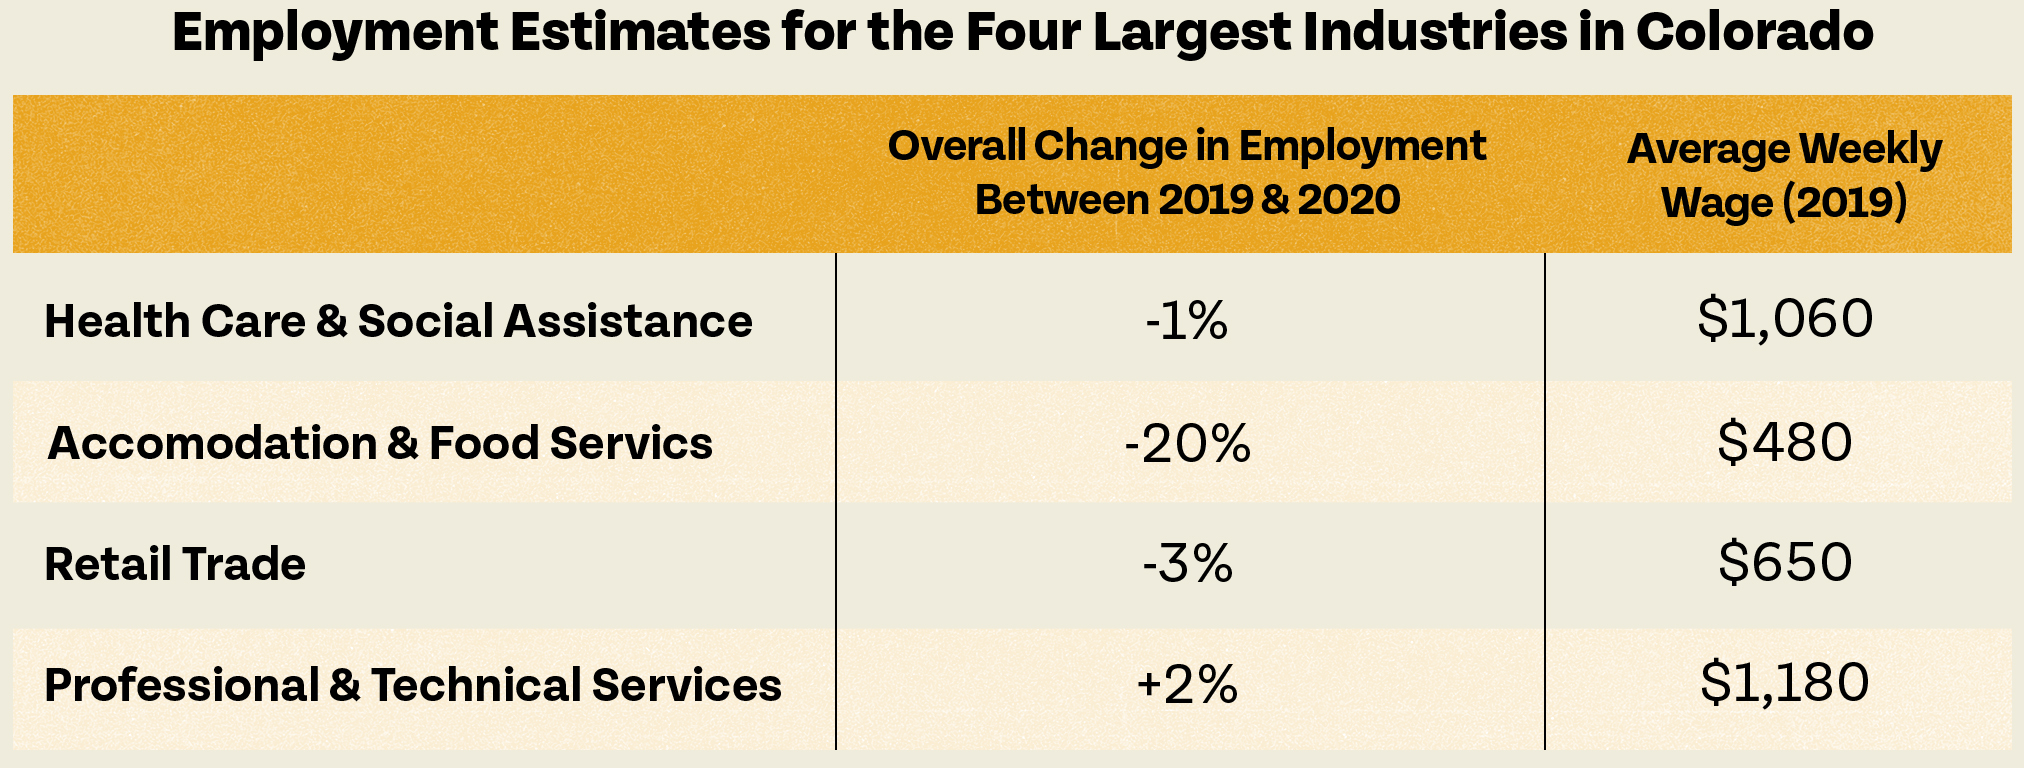 Employment Estimates for the Four Largest Industries in Colorado